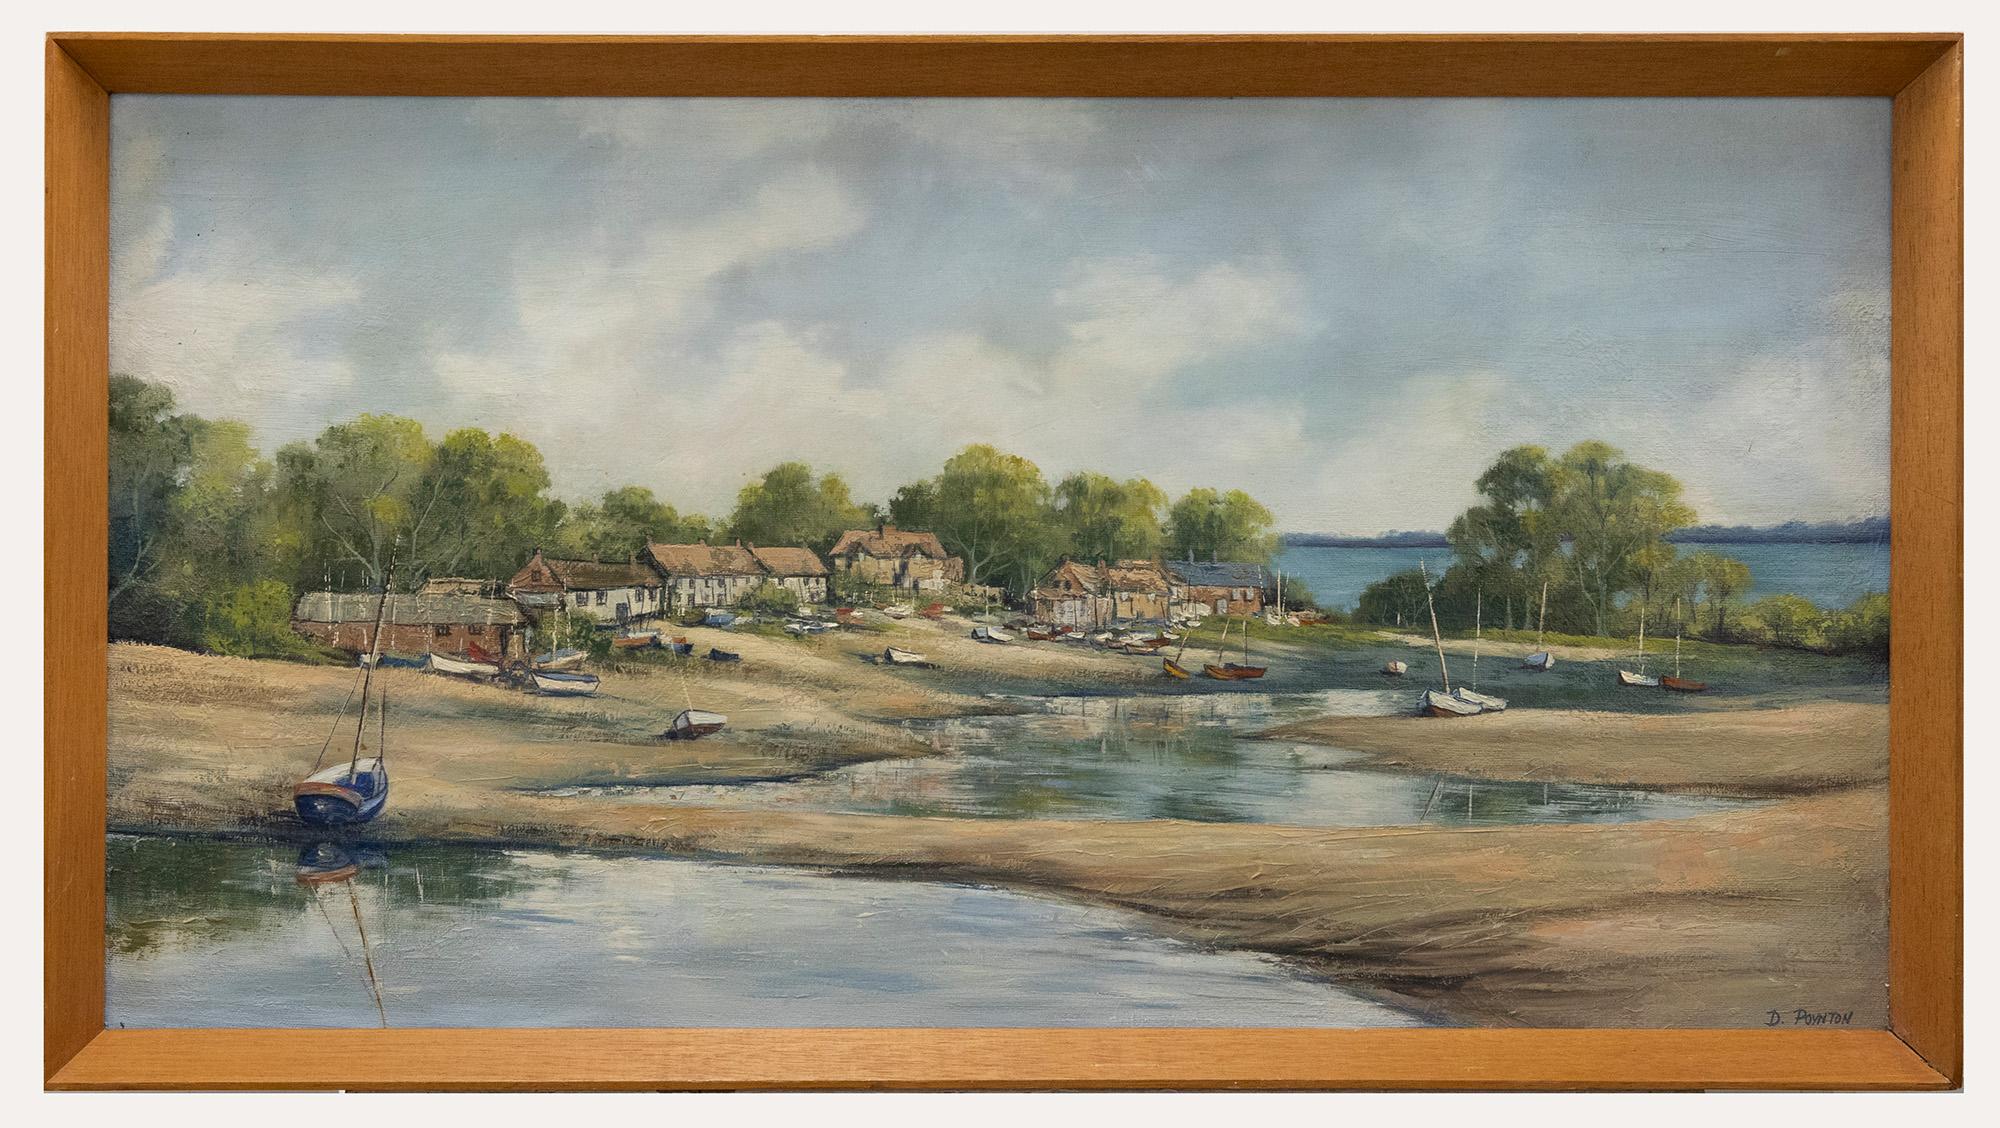 Unknown Figurative Painting - D. Poynton - Framed 20th Century Oil, Harbour Beach at Low Tide